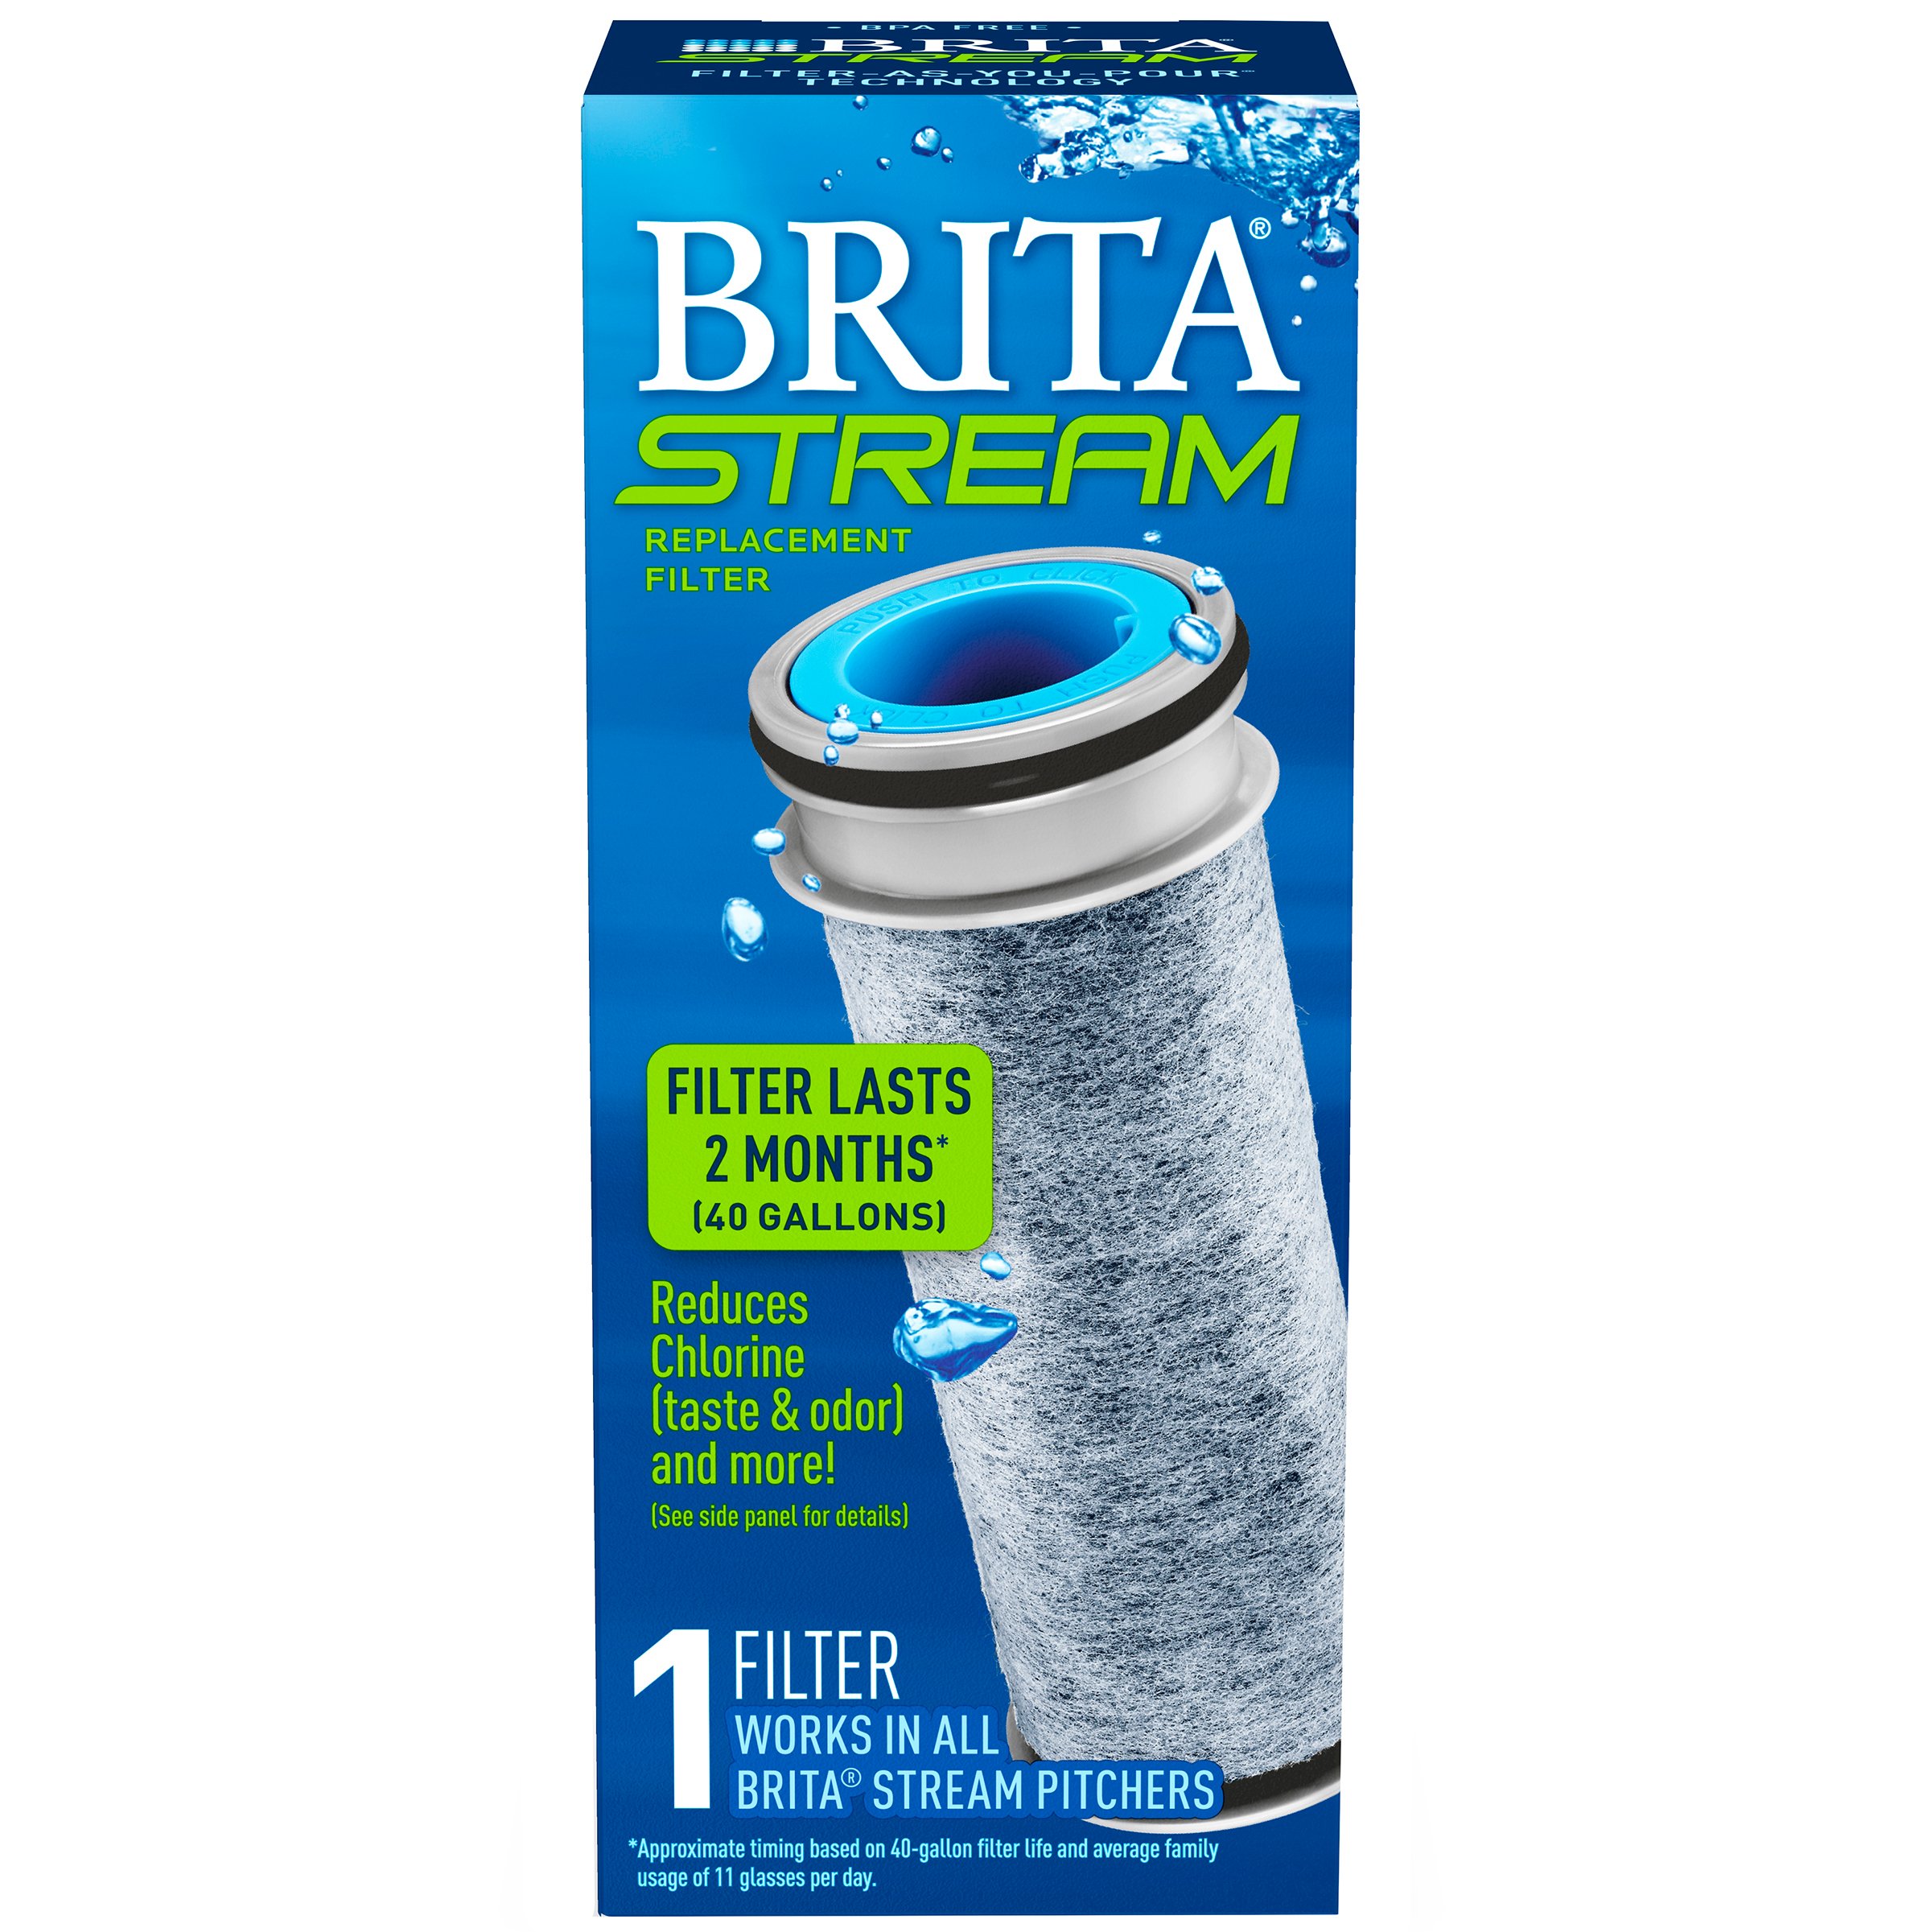 Brita Basic Water Filter Faucet System - White - Shop Water Filters at H-E-B